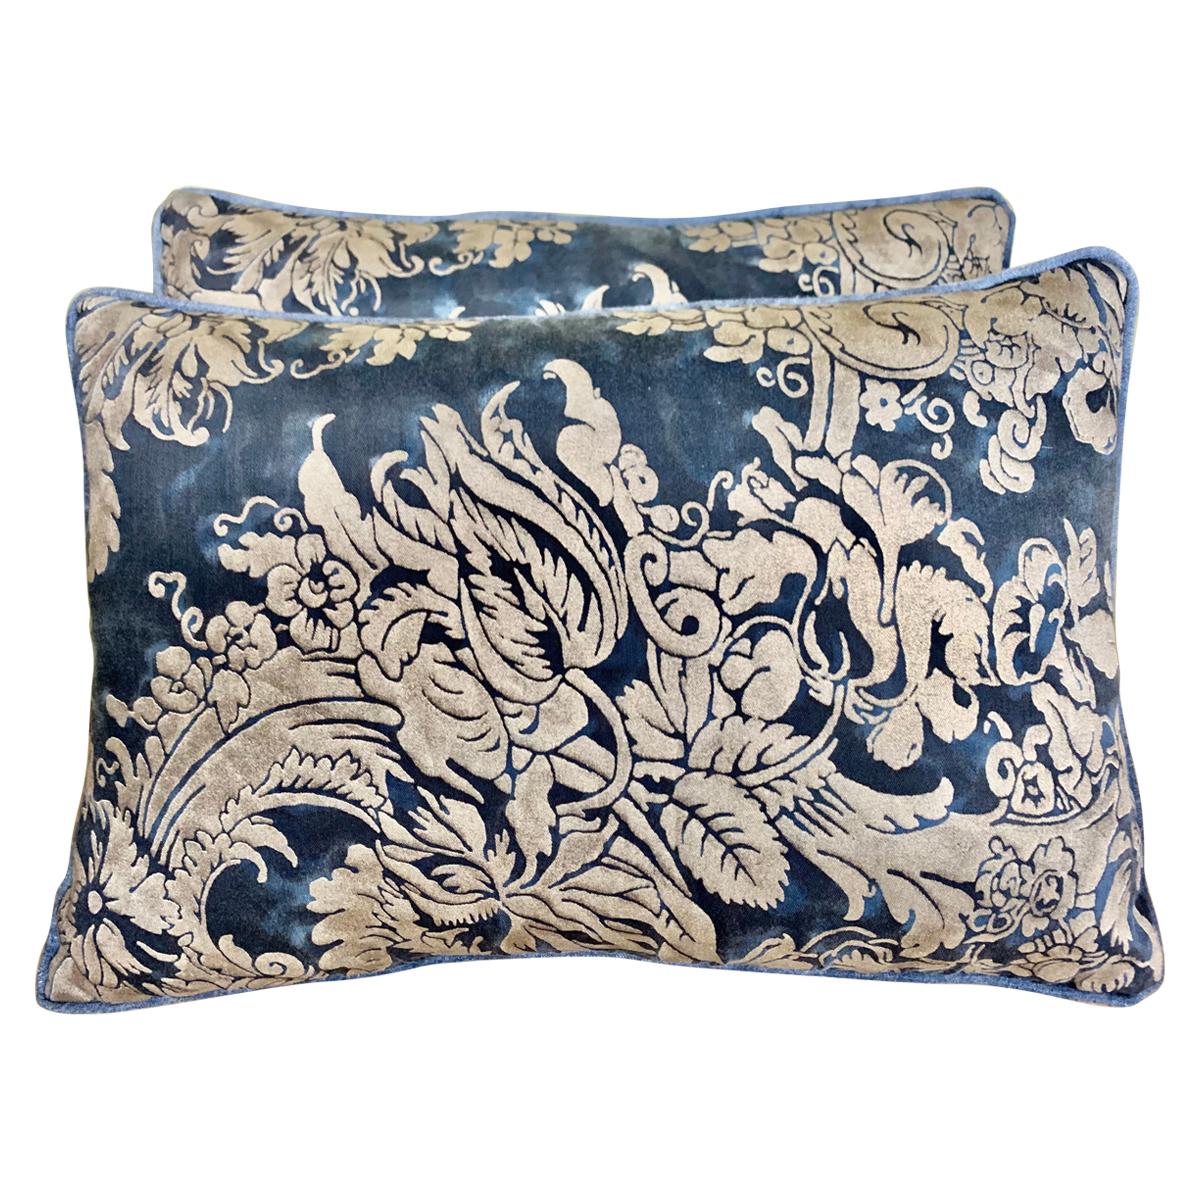 Blue and Silver Fortuny Textile Pillows